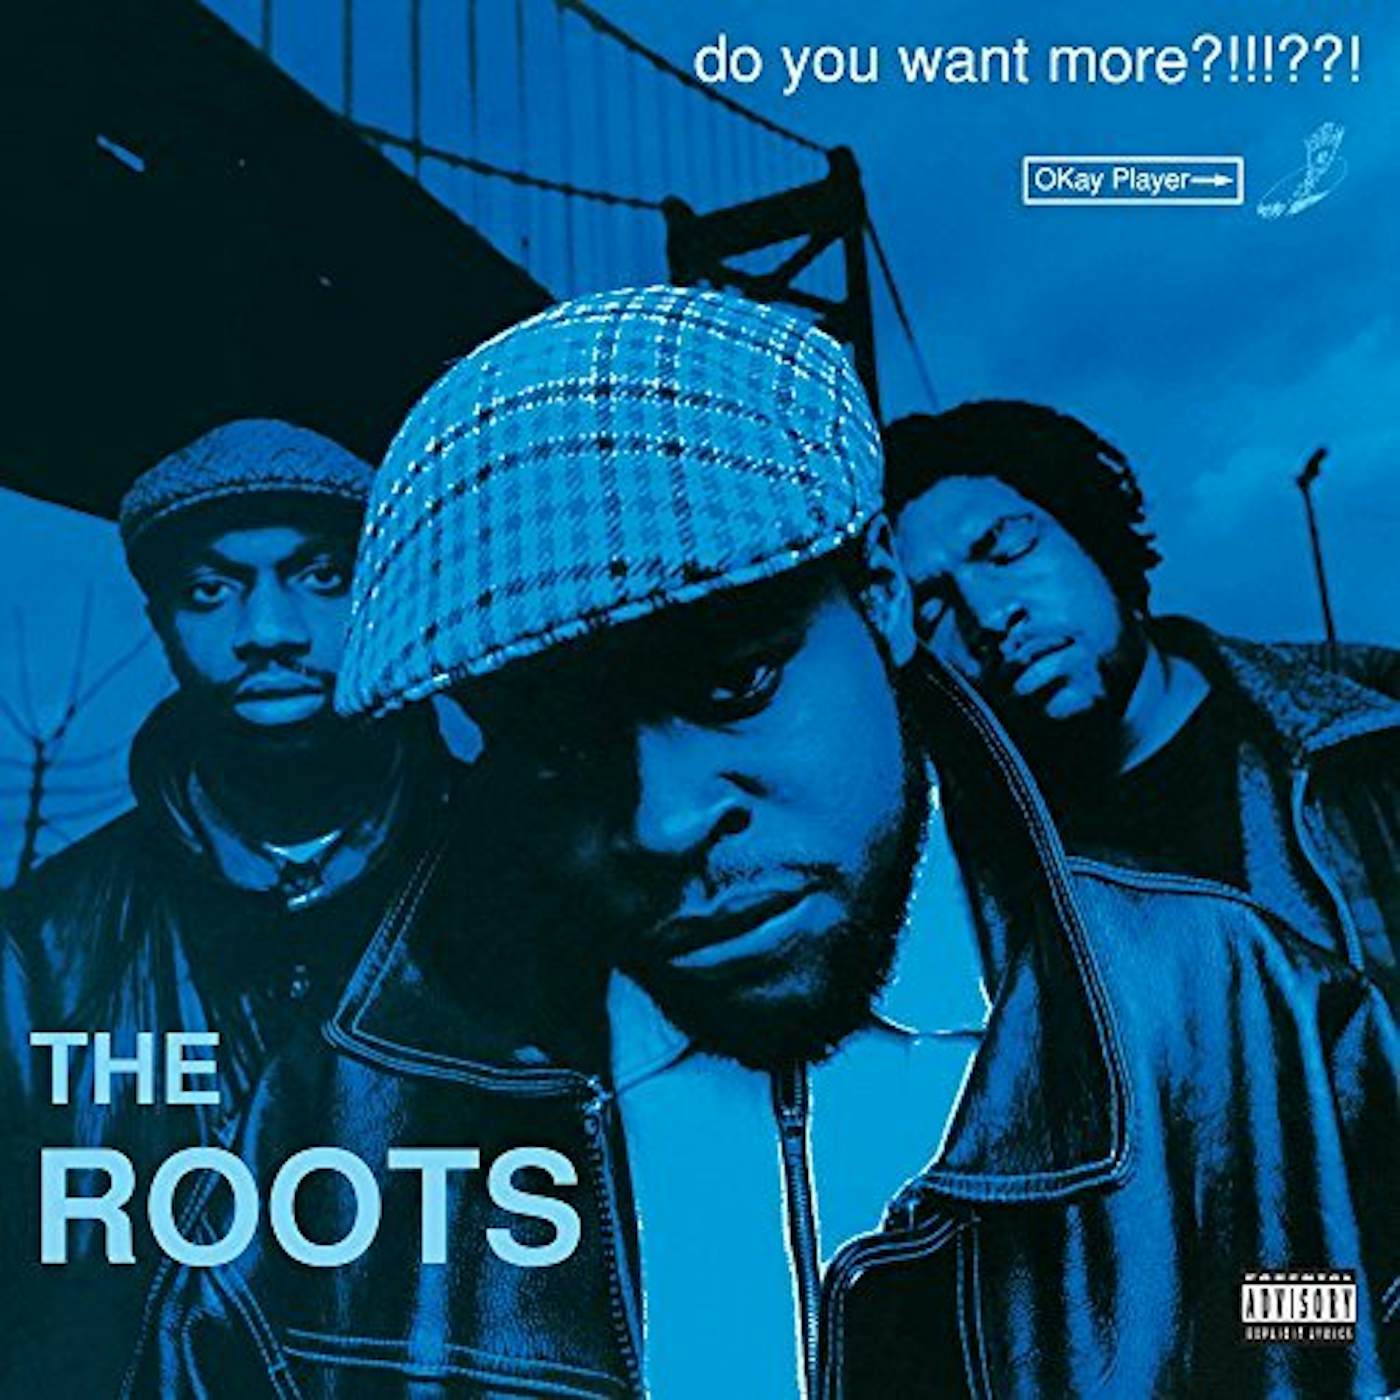 The Roots DO YOU WANT MORE Vinyl Record